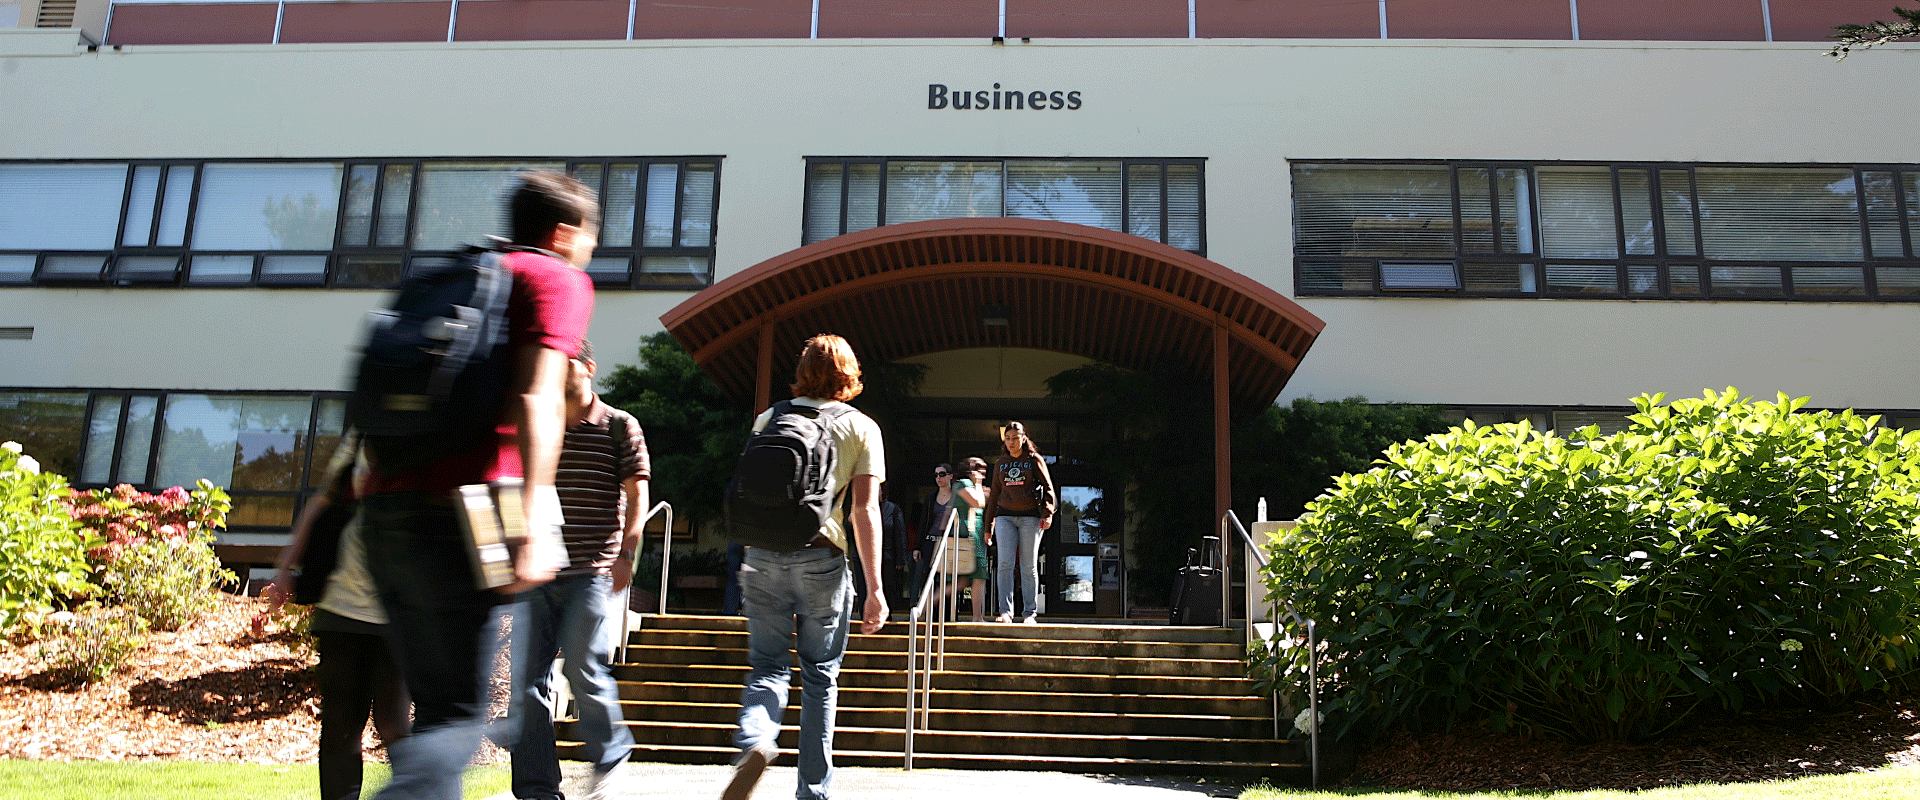 Students enter the Business Building